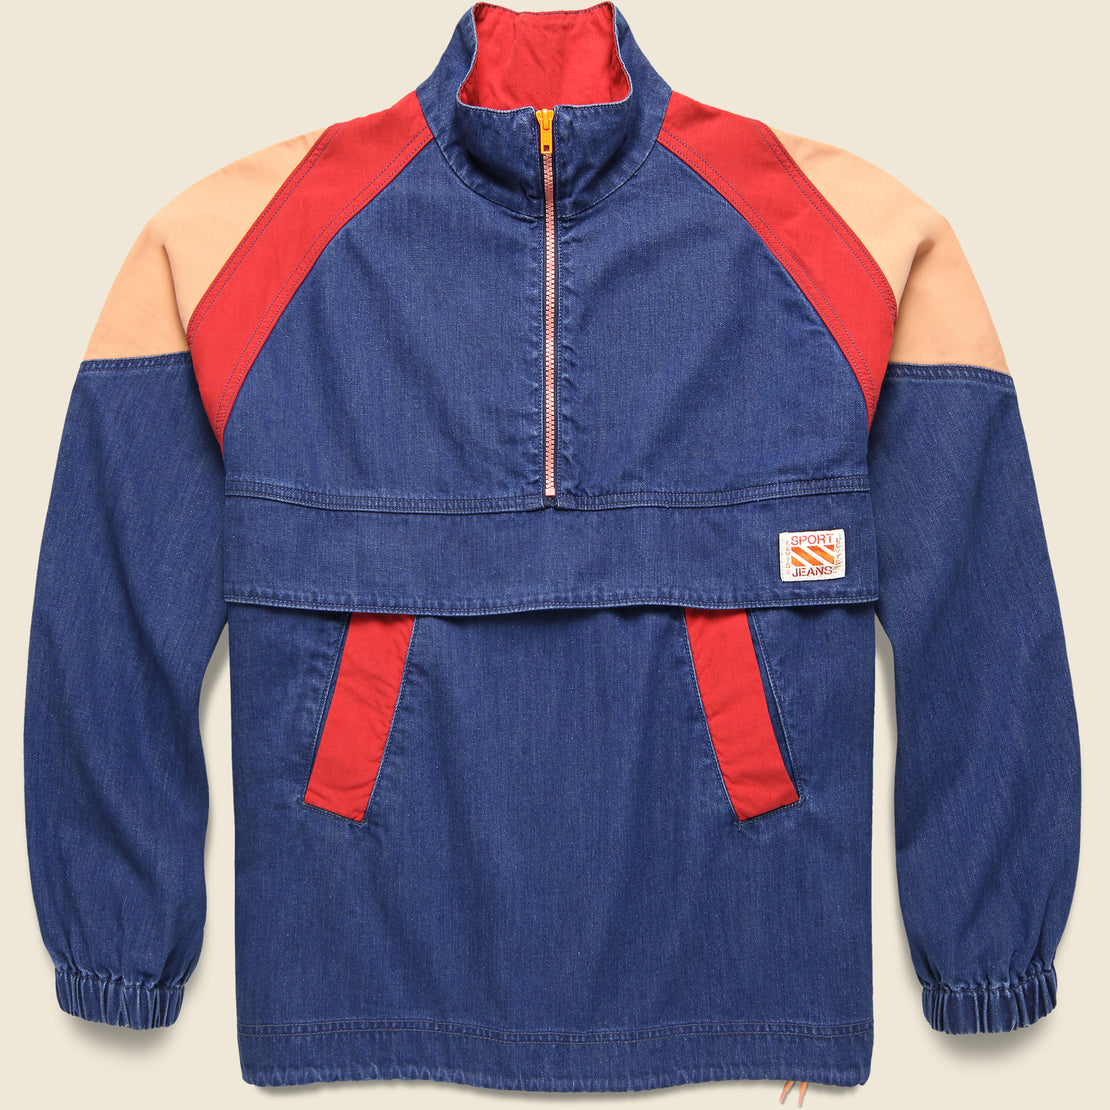 Levis Vintage Clothing Sports Jean Anorak - Bright Rinse